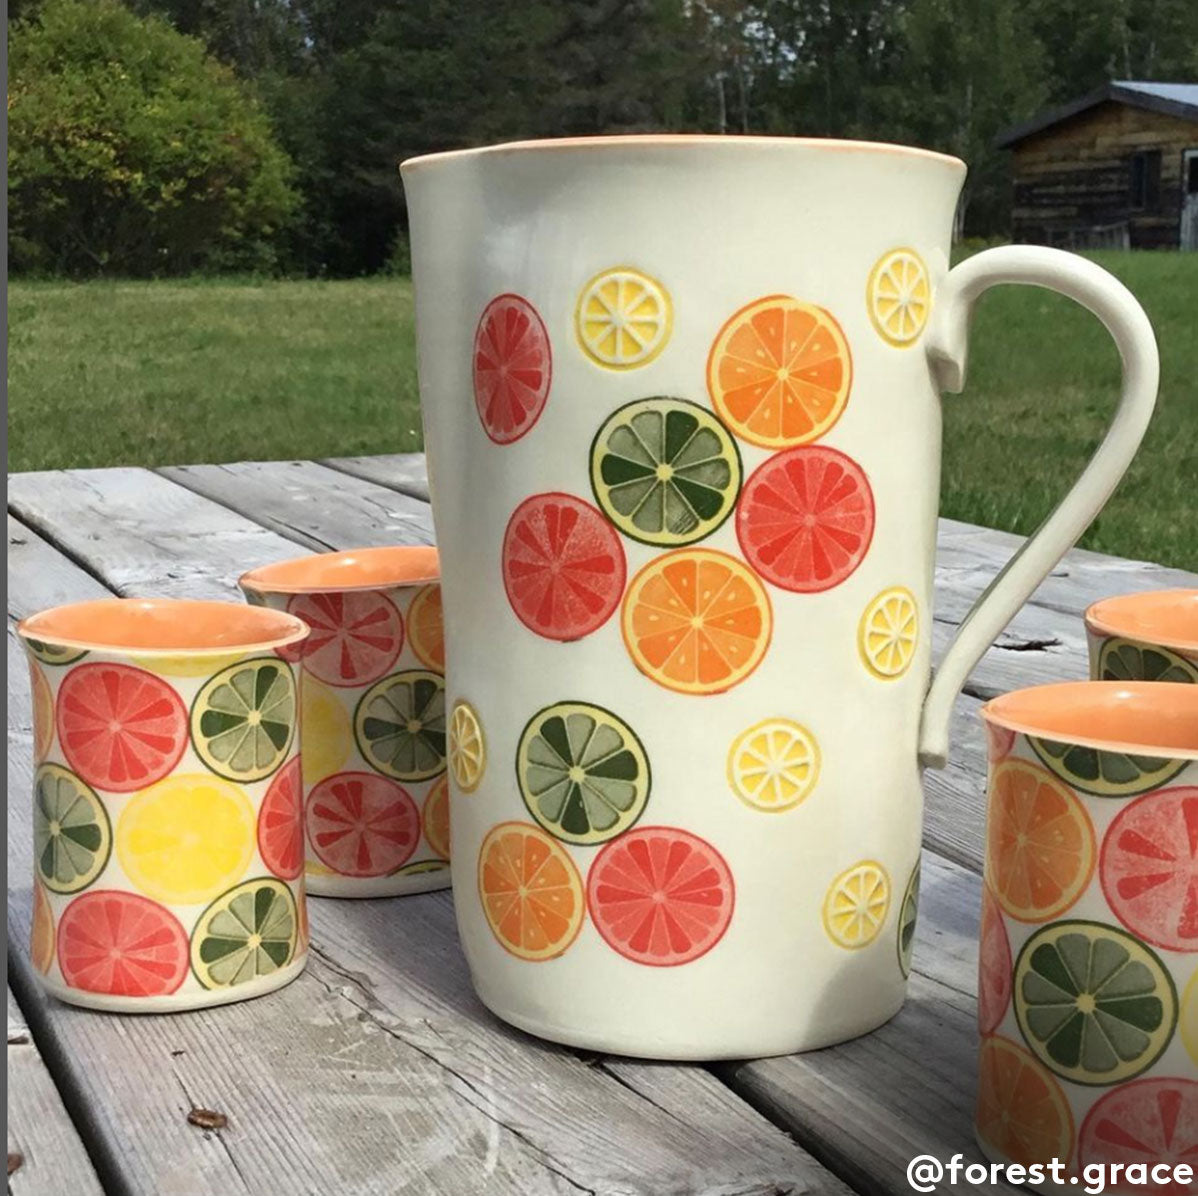 How to Get Stunning Results With Underglaze Transfers - The Art of